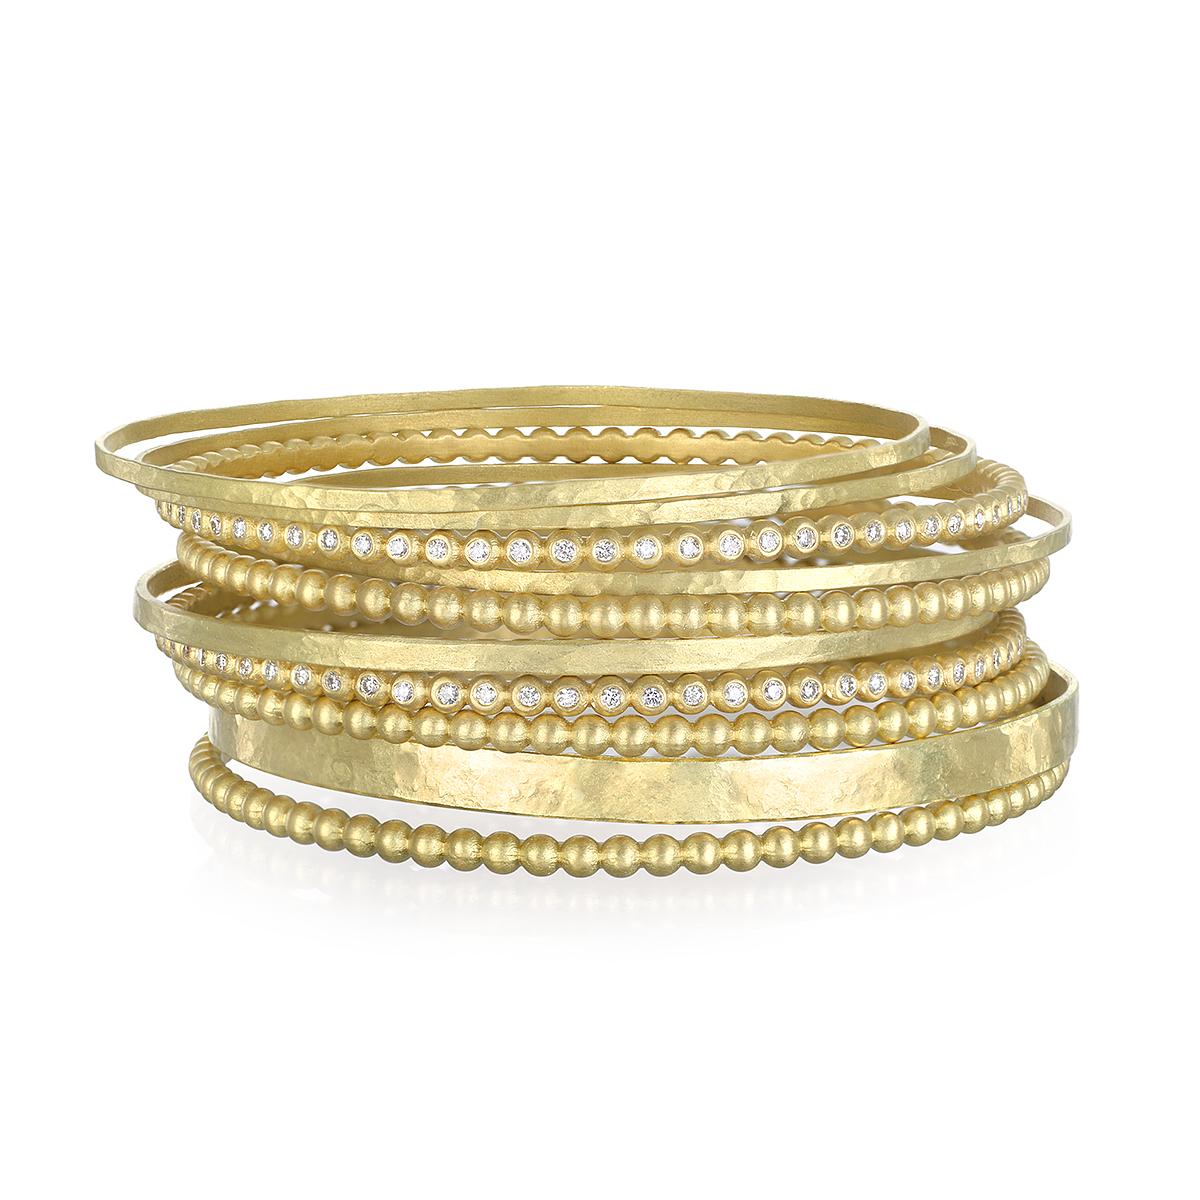 From Faye Kim's signature bangle collection, this flat bangle in 18K* gold is lightly hammered for texture and contrast. Perfect for stacking with other bangles and bracelets!

Bangles are sold individually.

Width 2.5mm 
Diameter 2.5